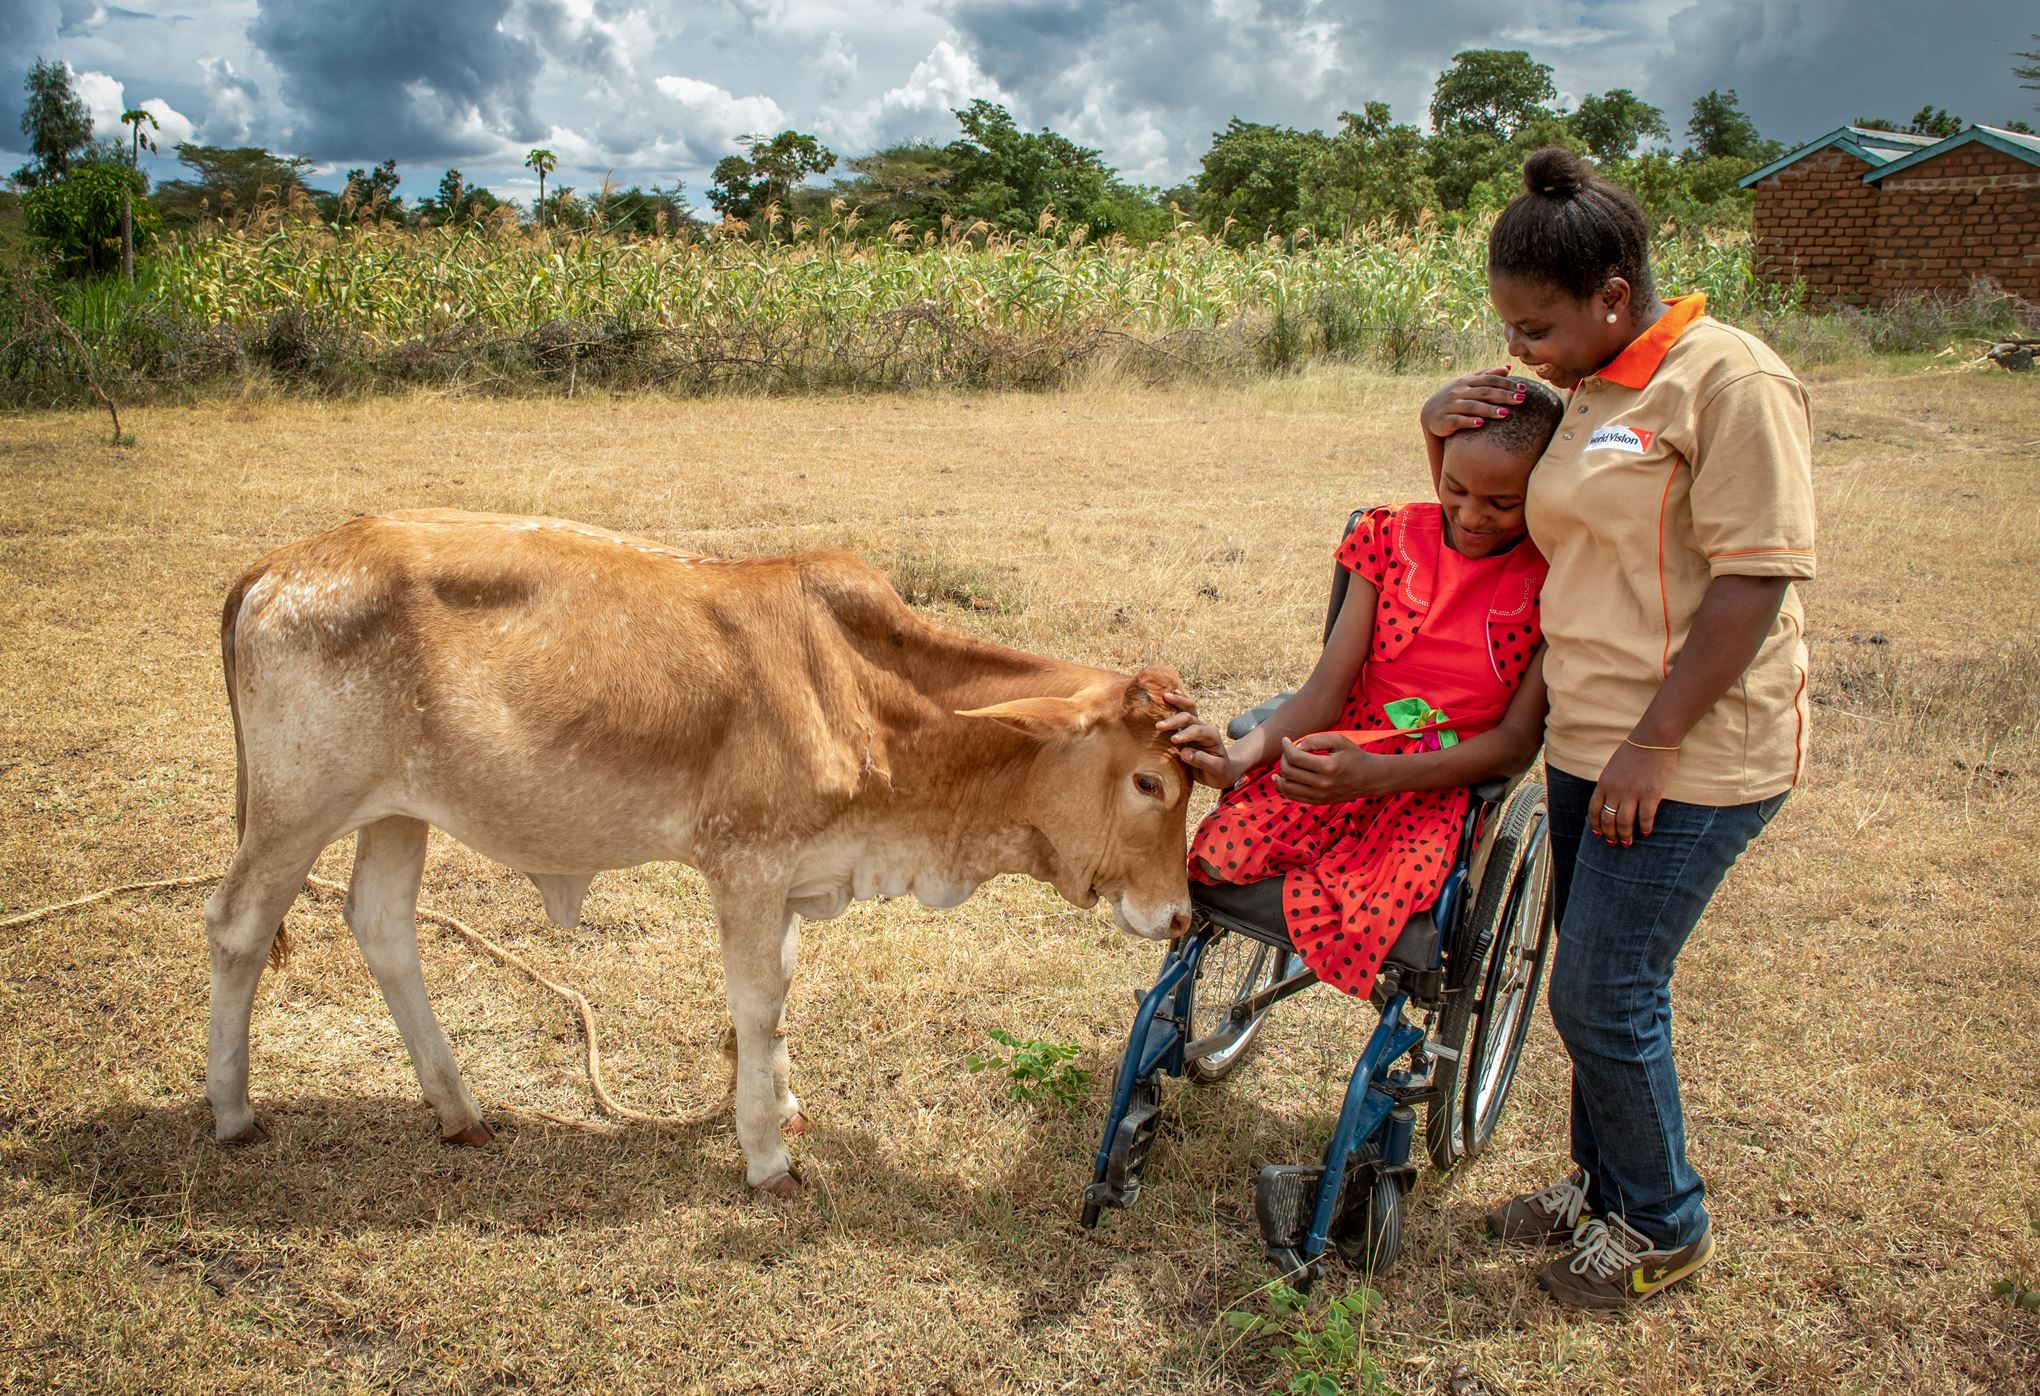 World Vision staff member helps a young girl in a wheelchair to take care of her family's cow